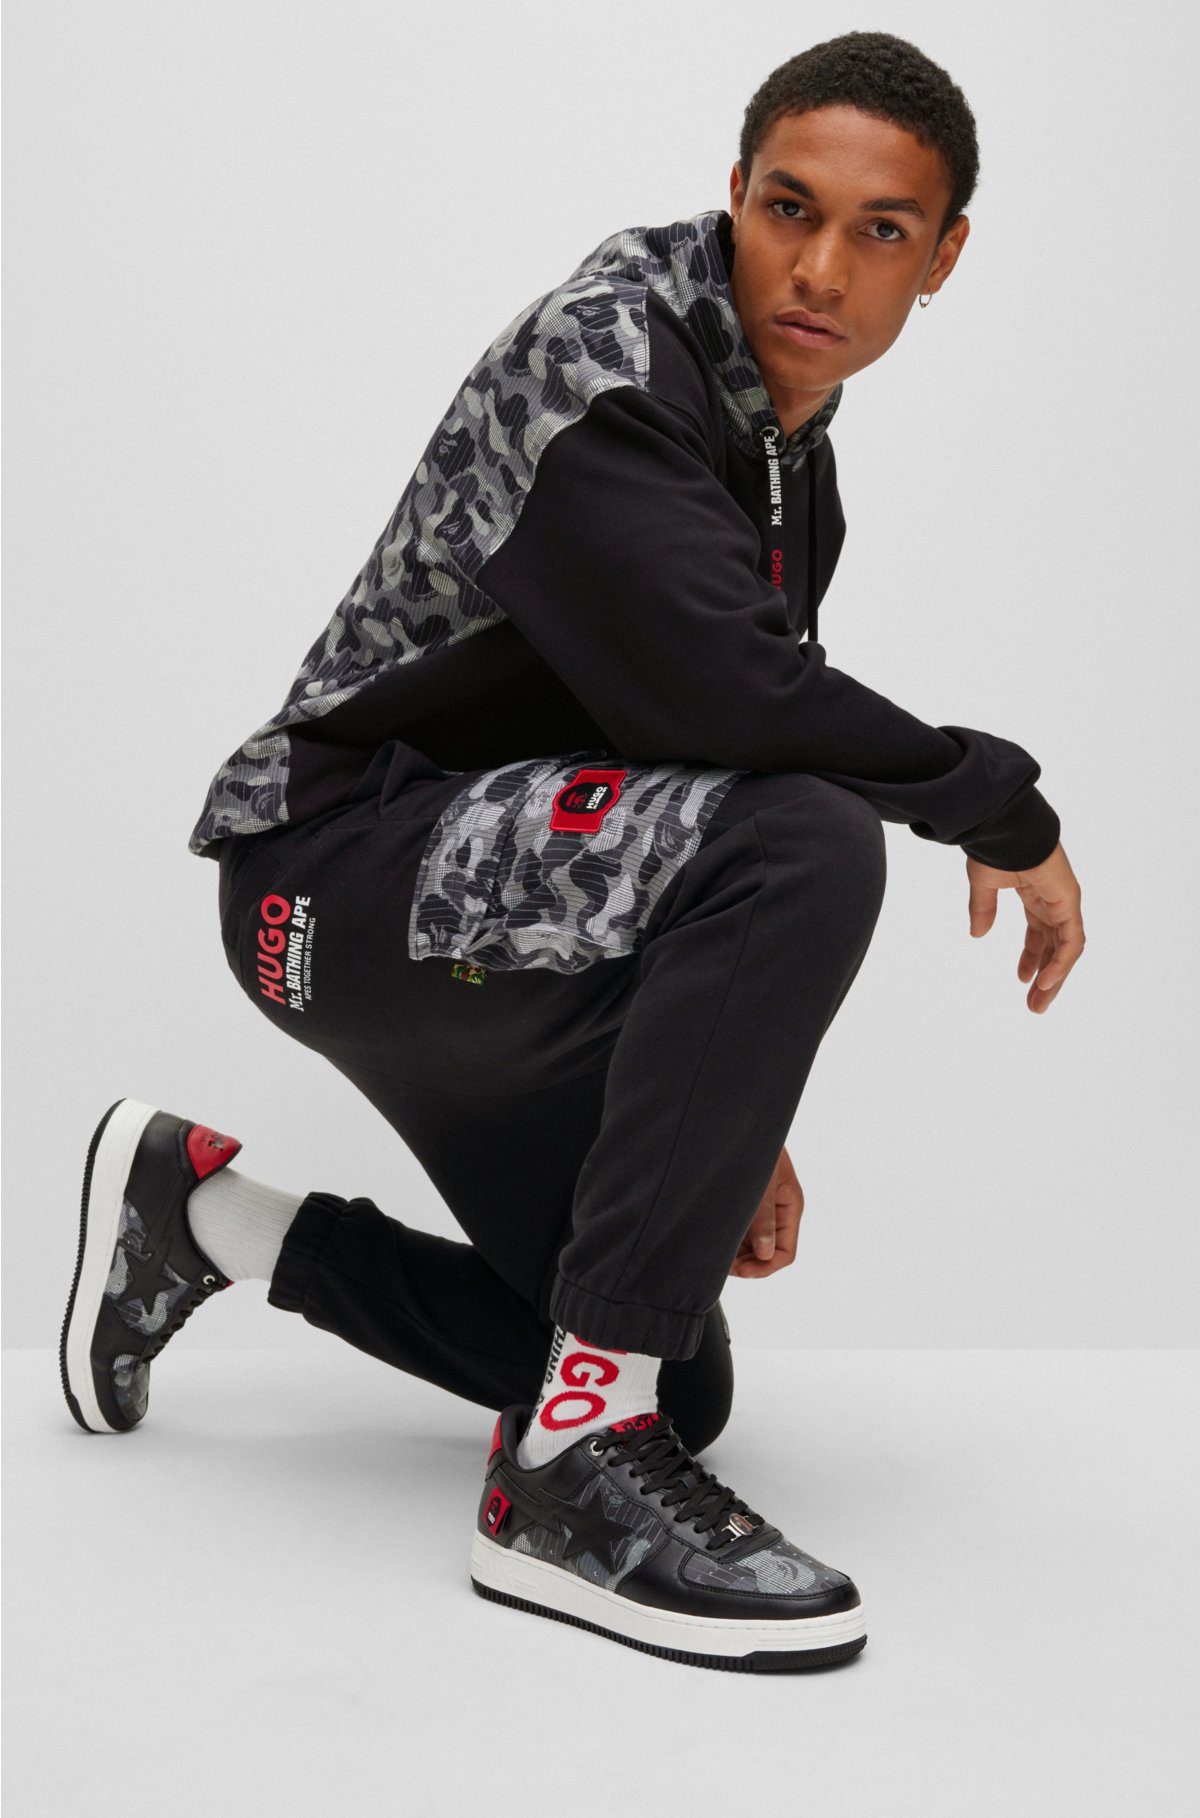 Cotton-jersey pattern - HUGO bottoms camouflage with tracksuit